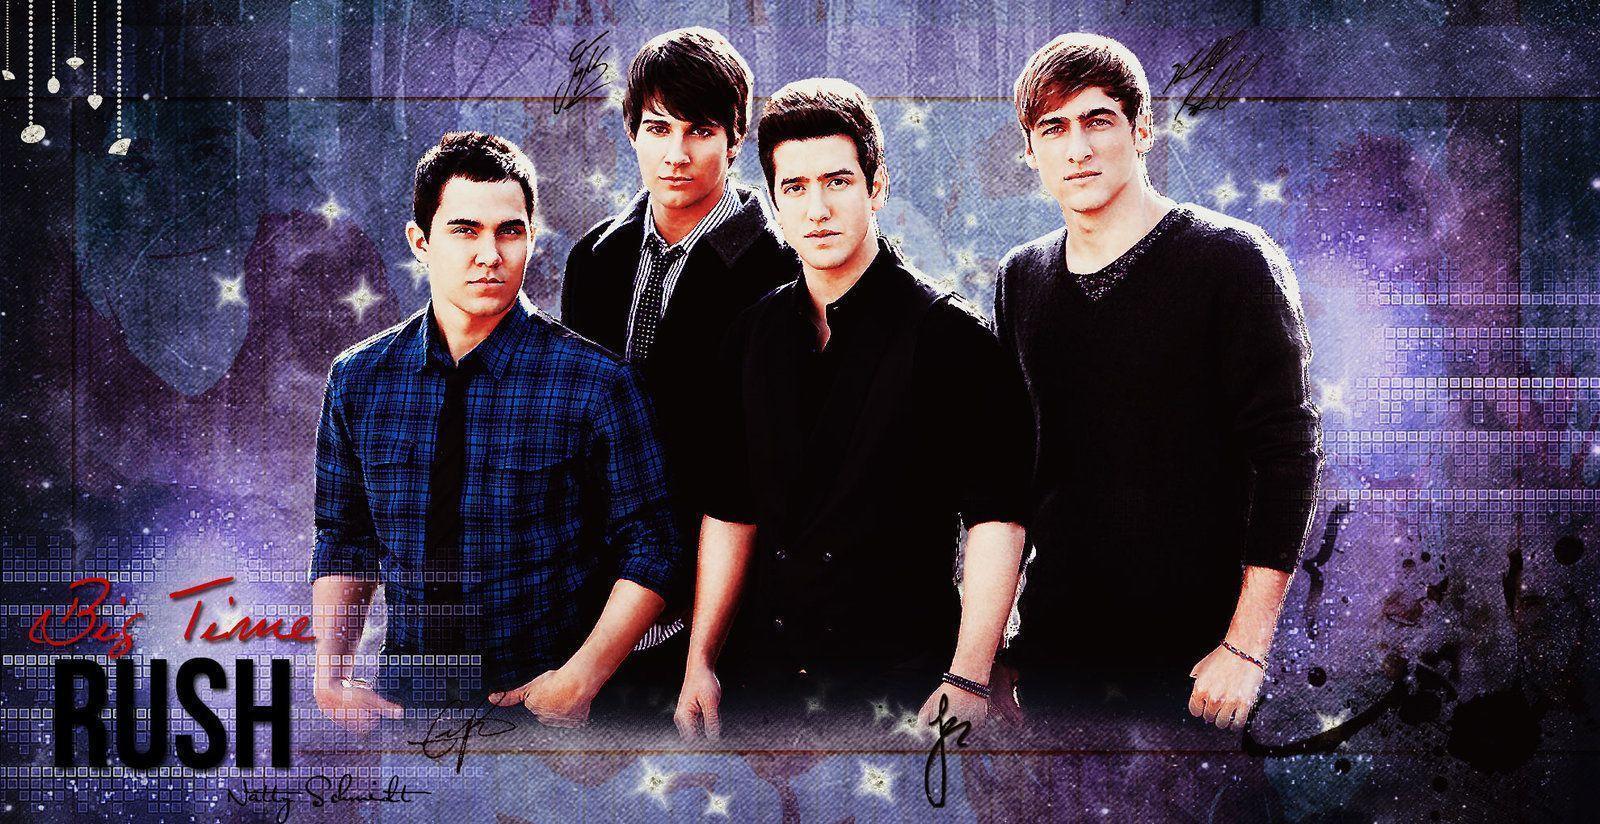 Big Time Rush Wallpapers - Top Free Big Time Rush Backgrounds -  WallpaperAccess